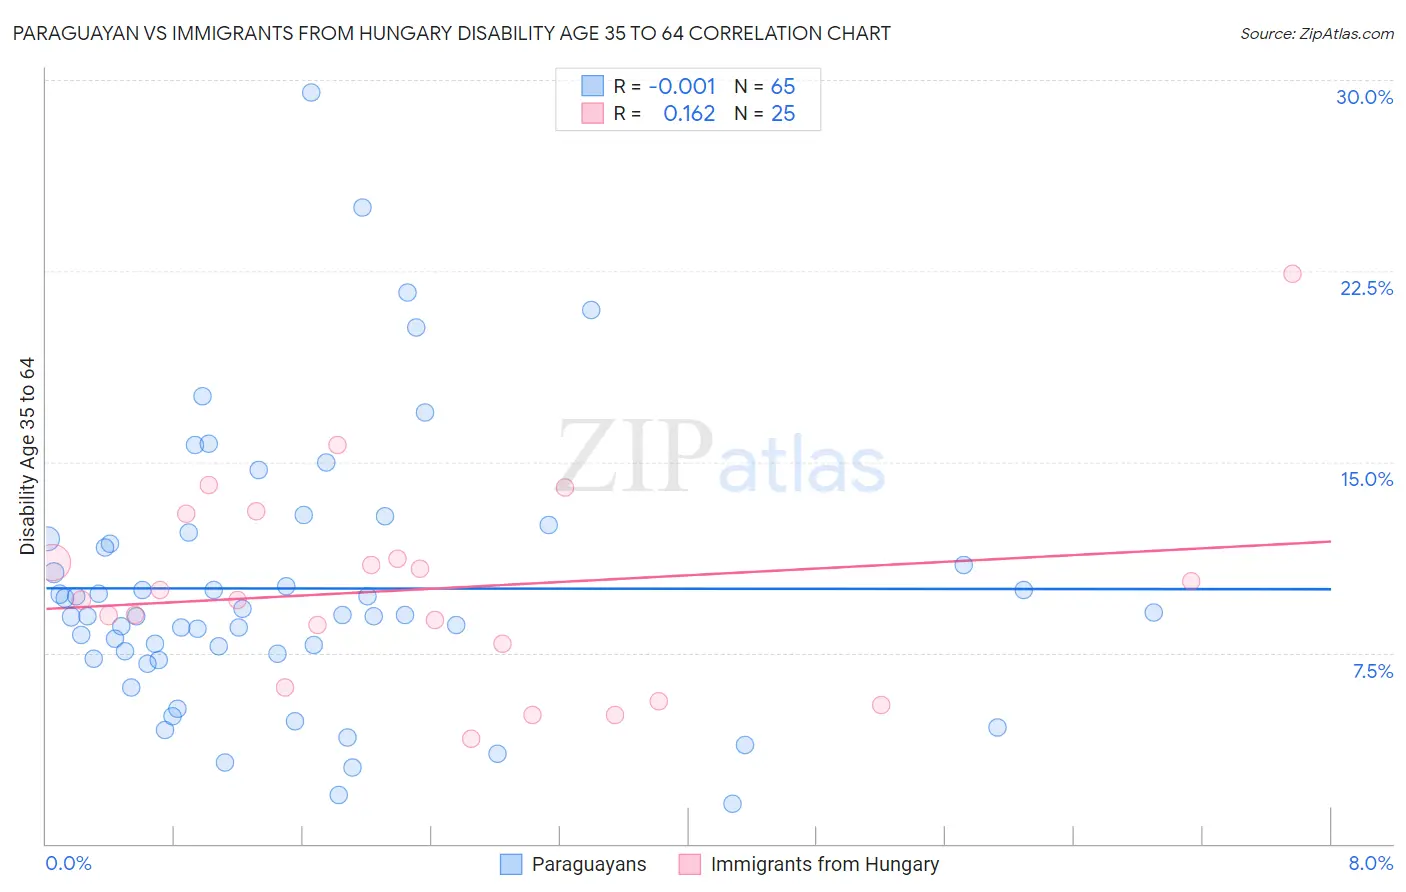 Paraguayan vs Immigrants from Hungary Disability Age 35 to 64